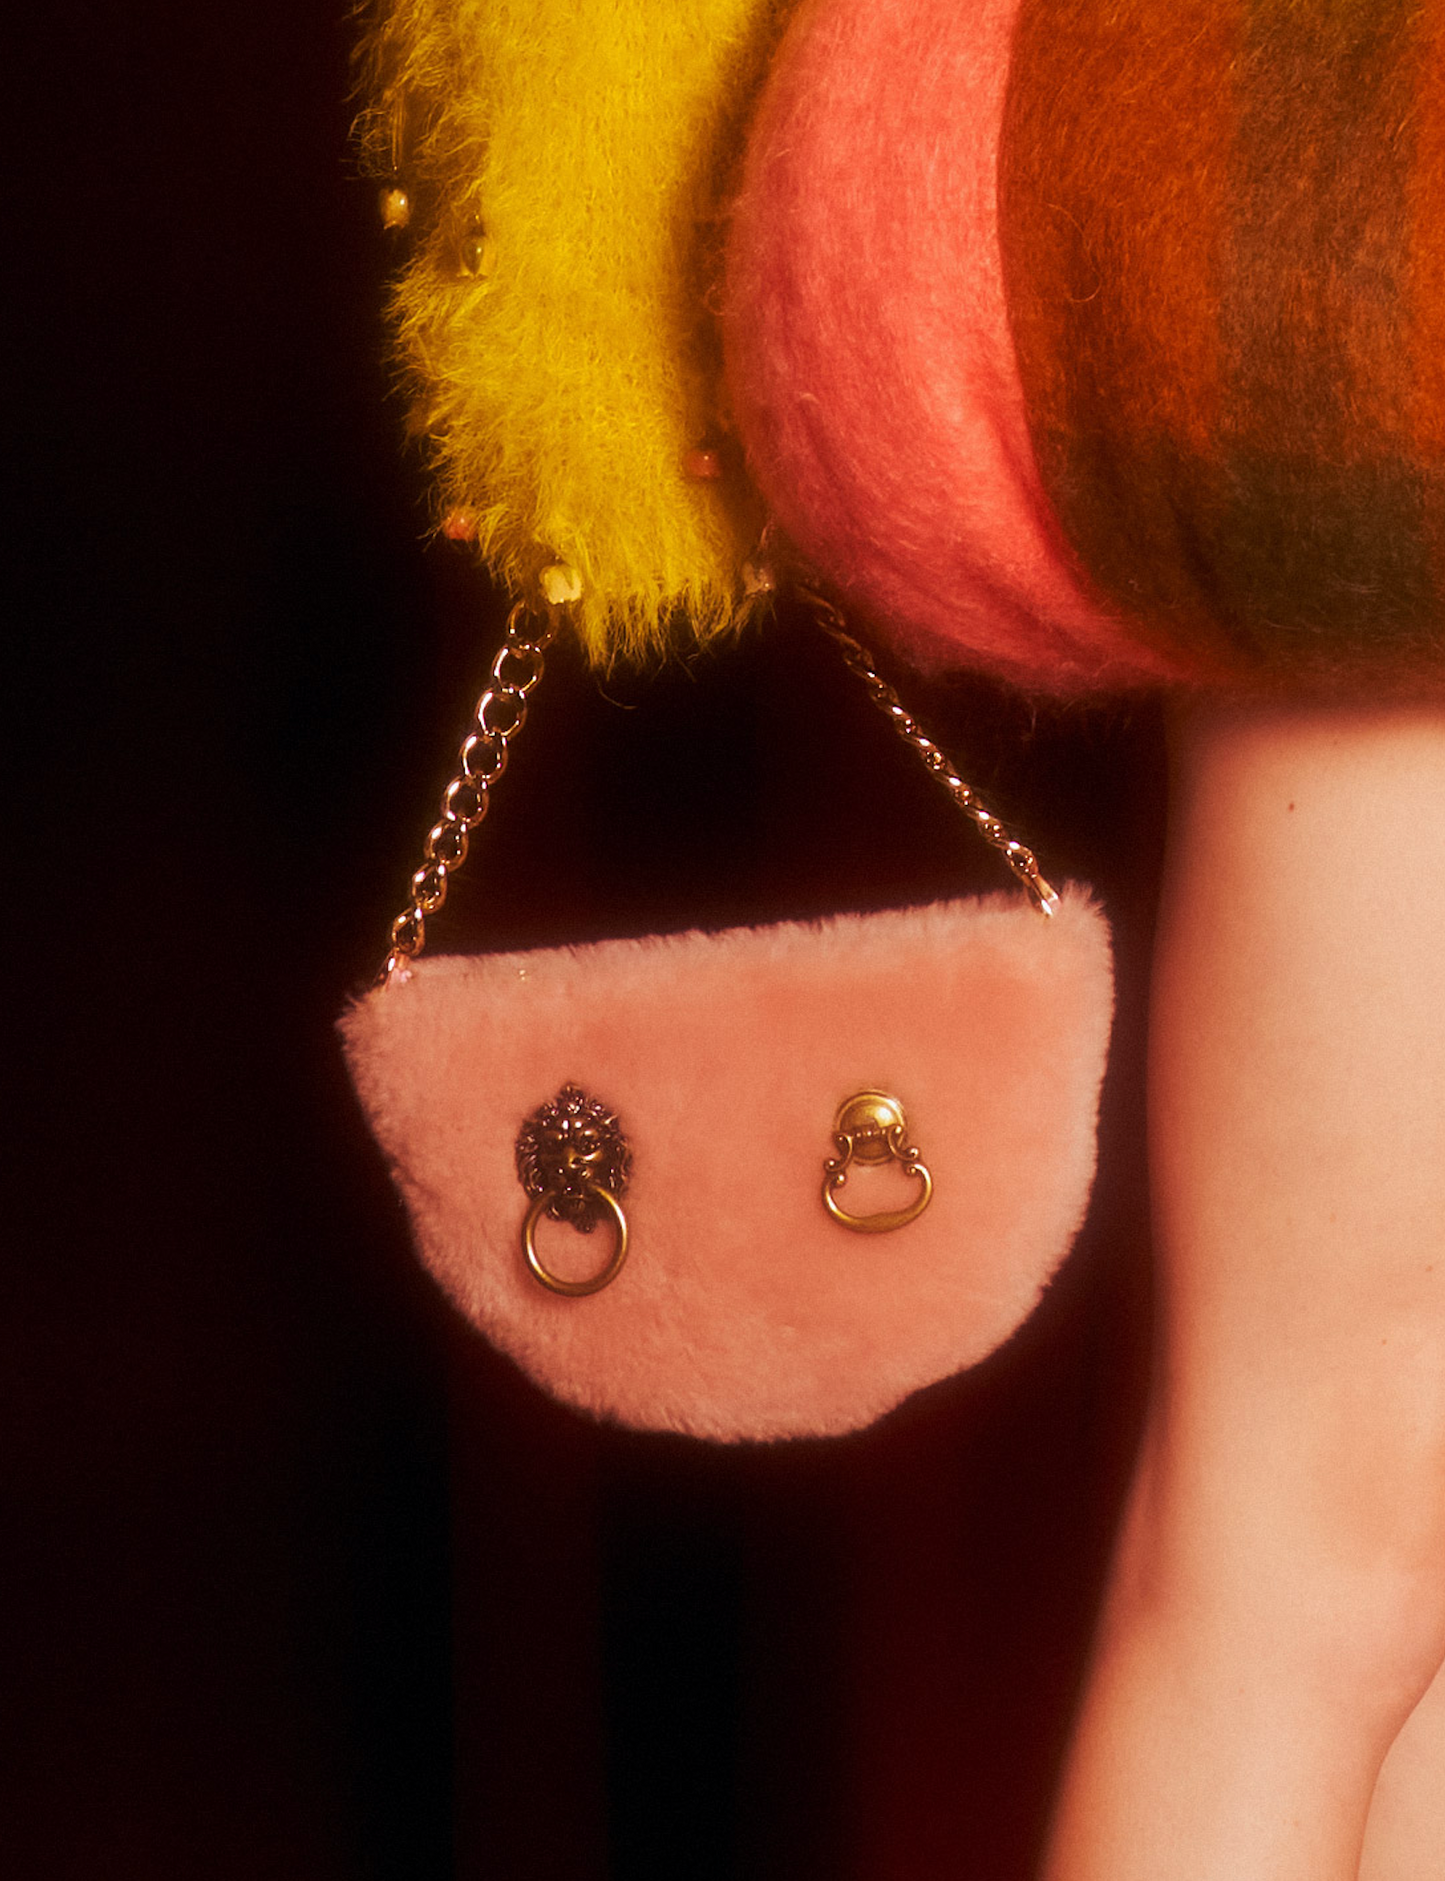 Pink shearling half moon shaped bag with two metal hardware details and metal chain strap.